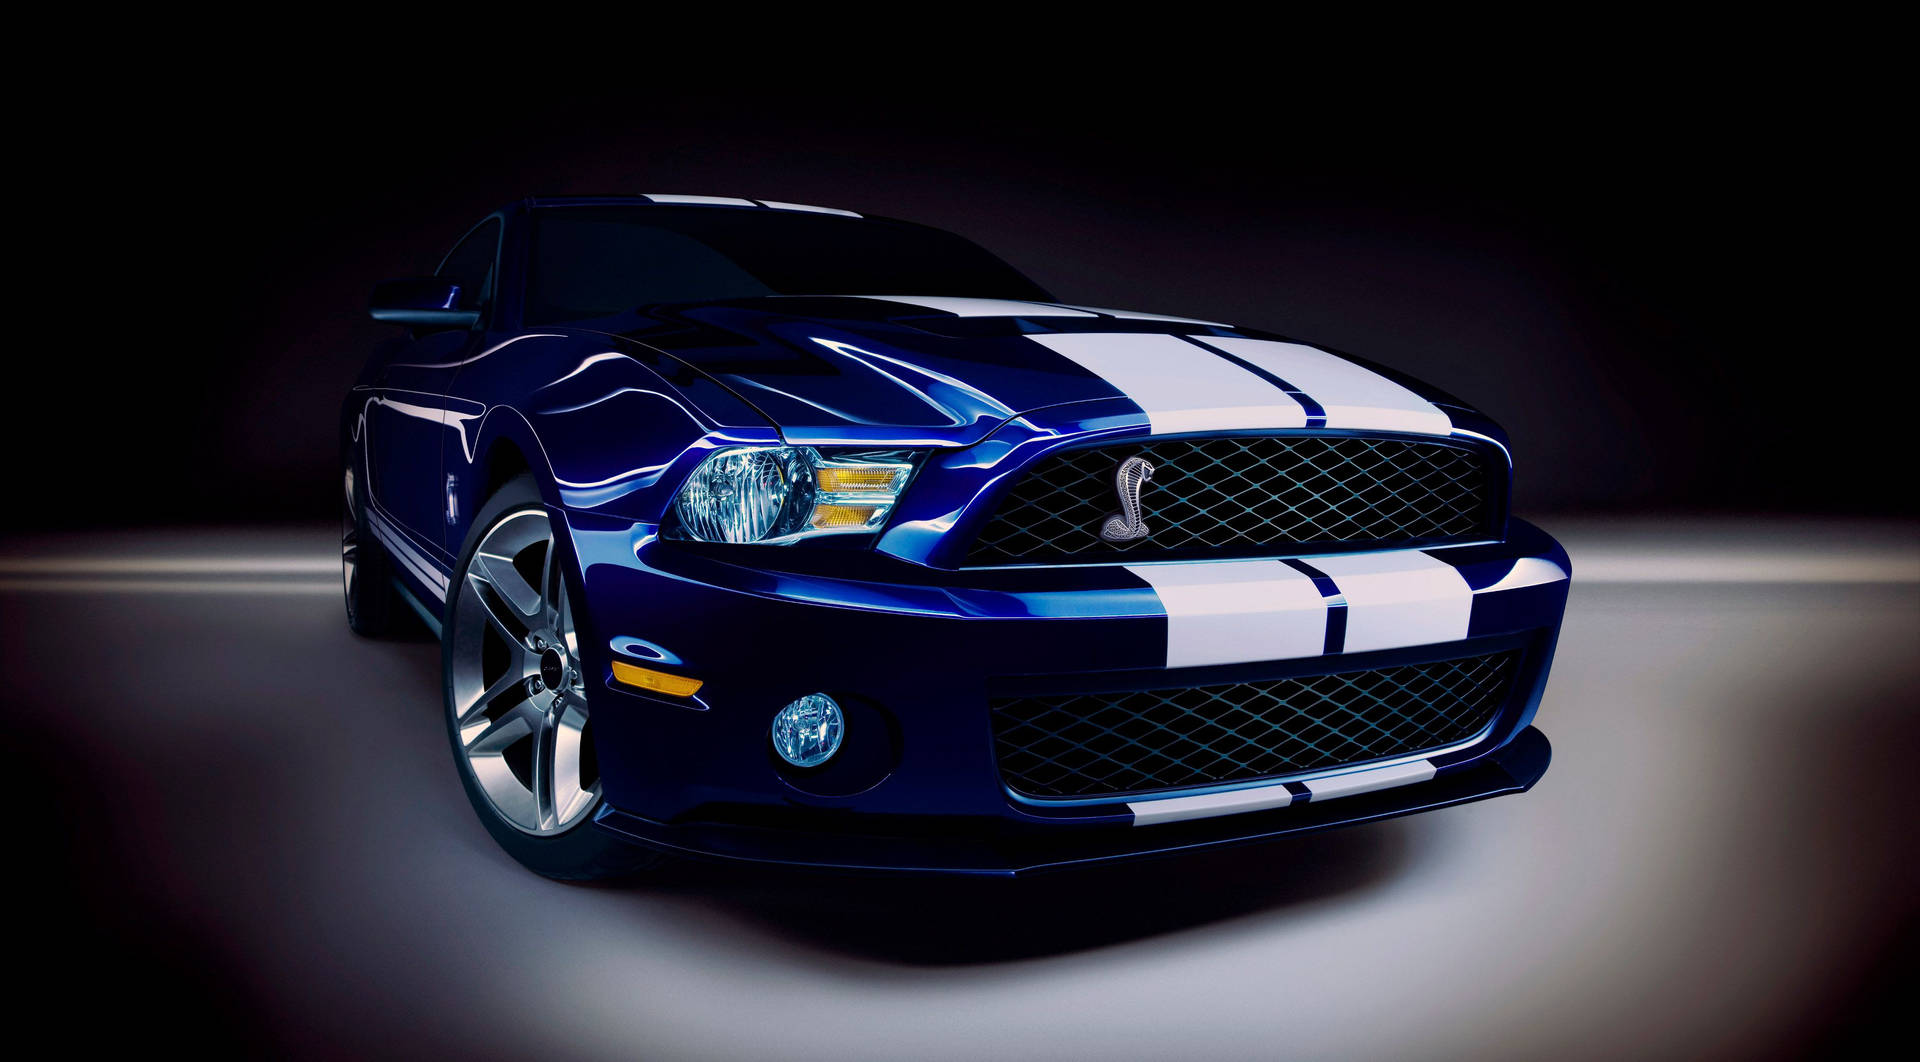 Ford Mustang Gt With Stripes Background